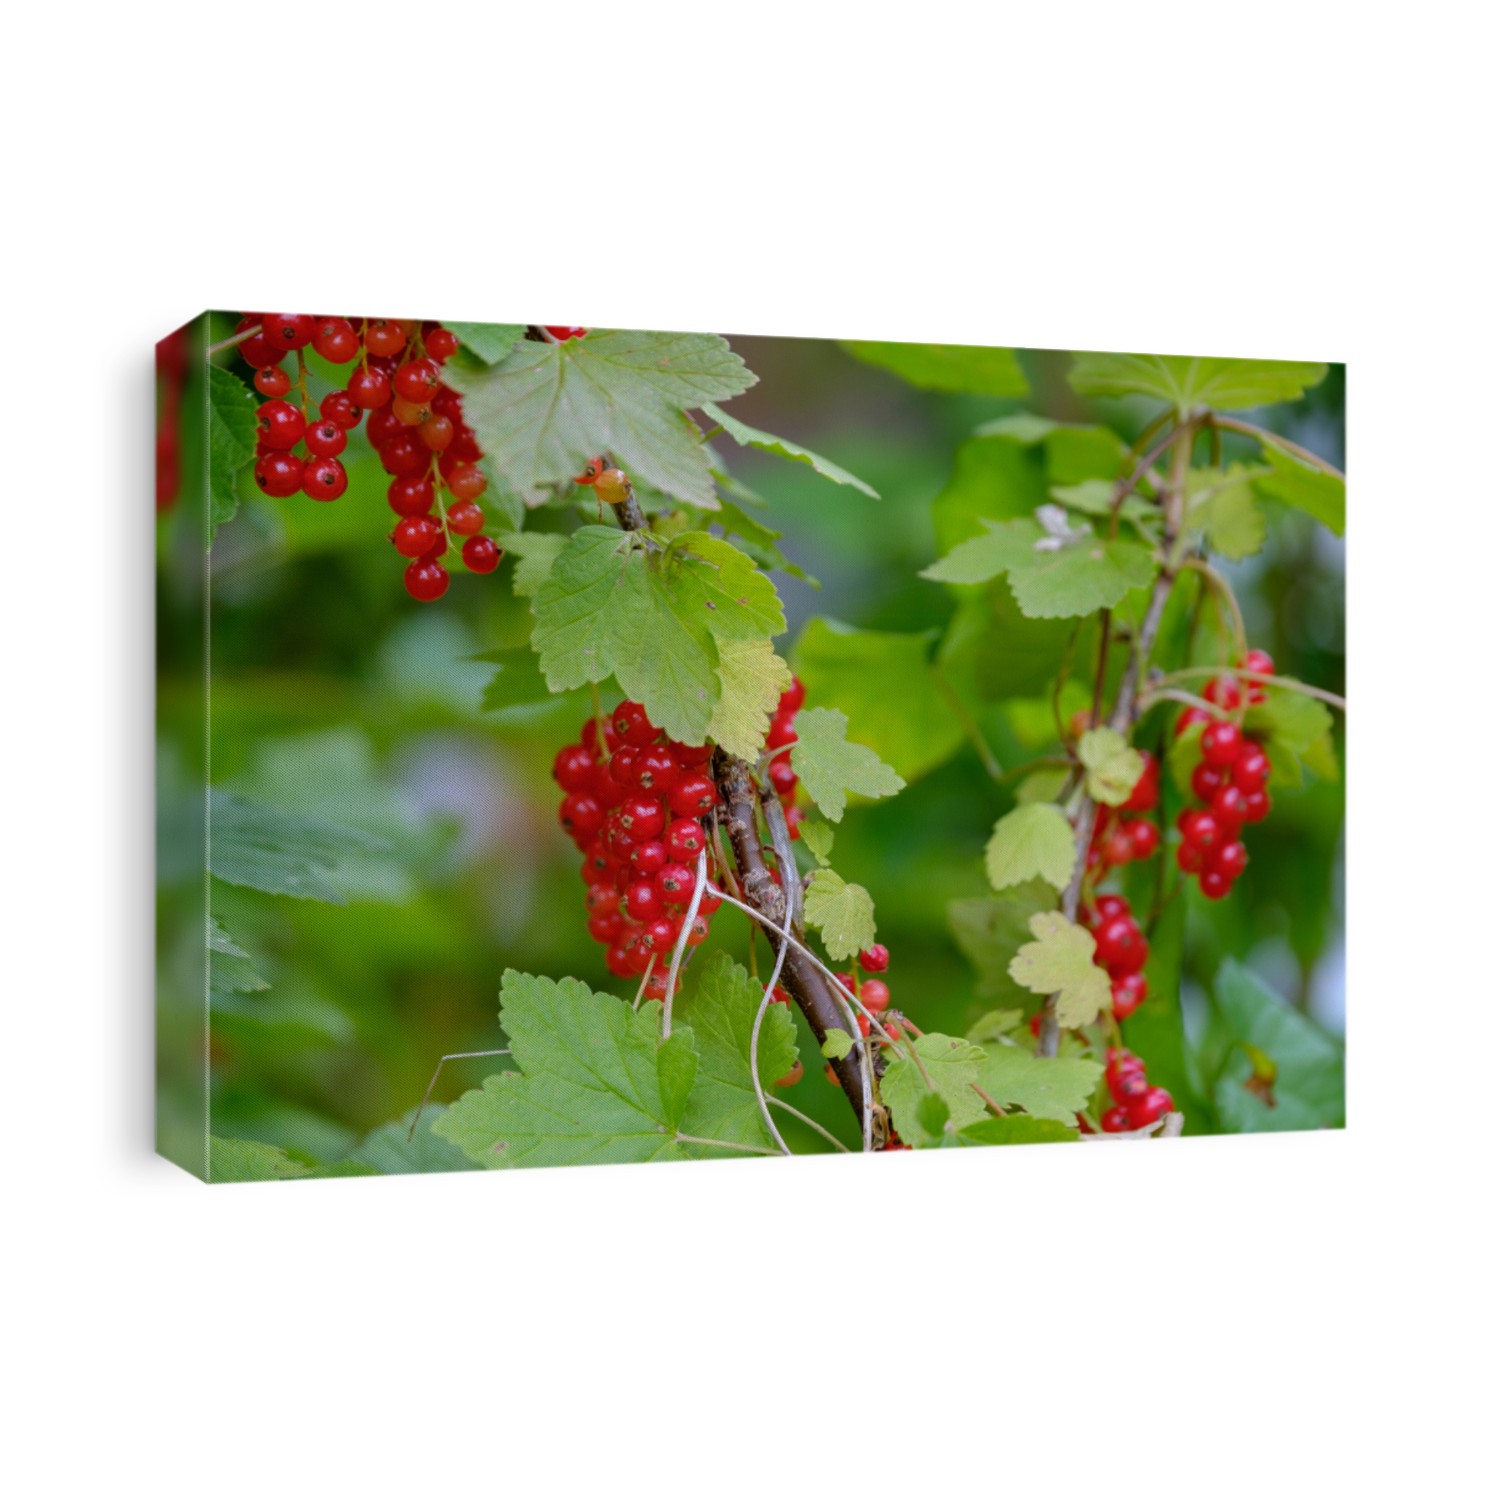 Red currant ripe berries on the bush in the garden